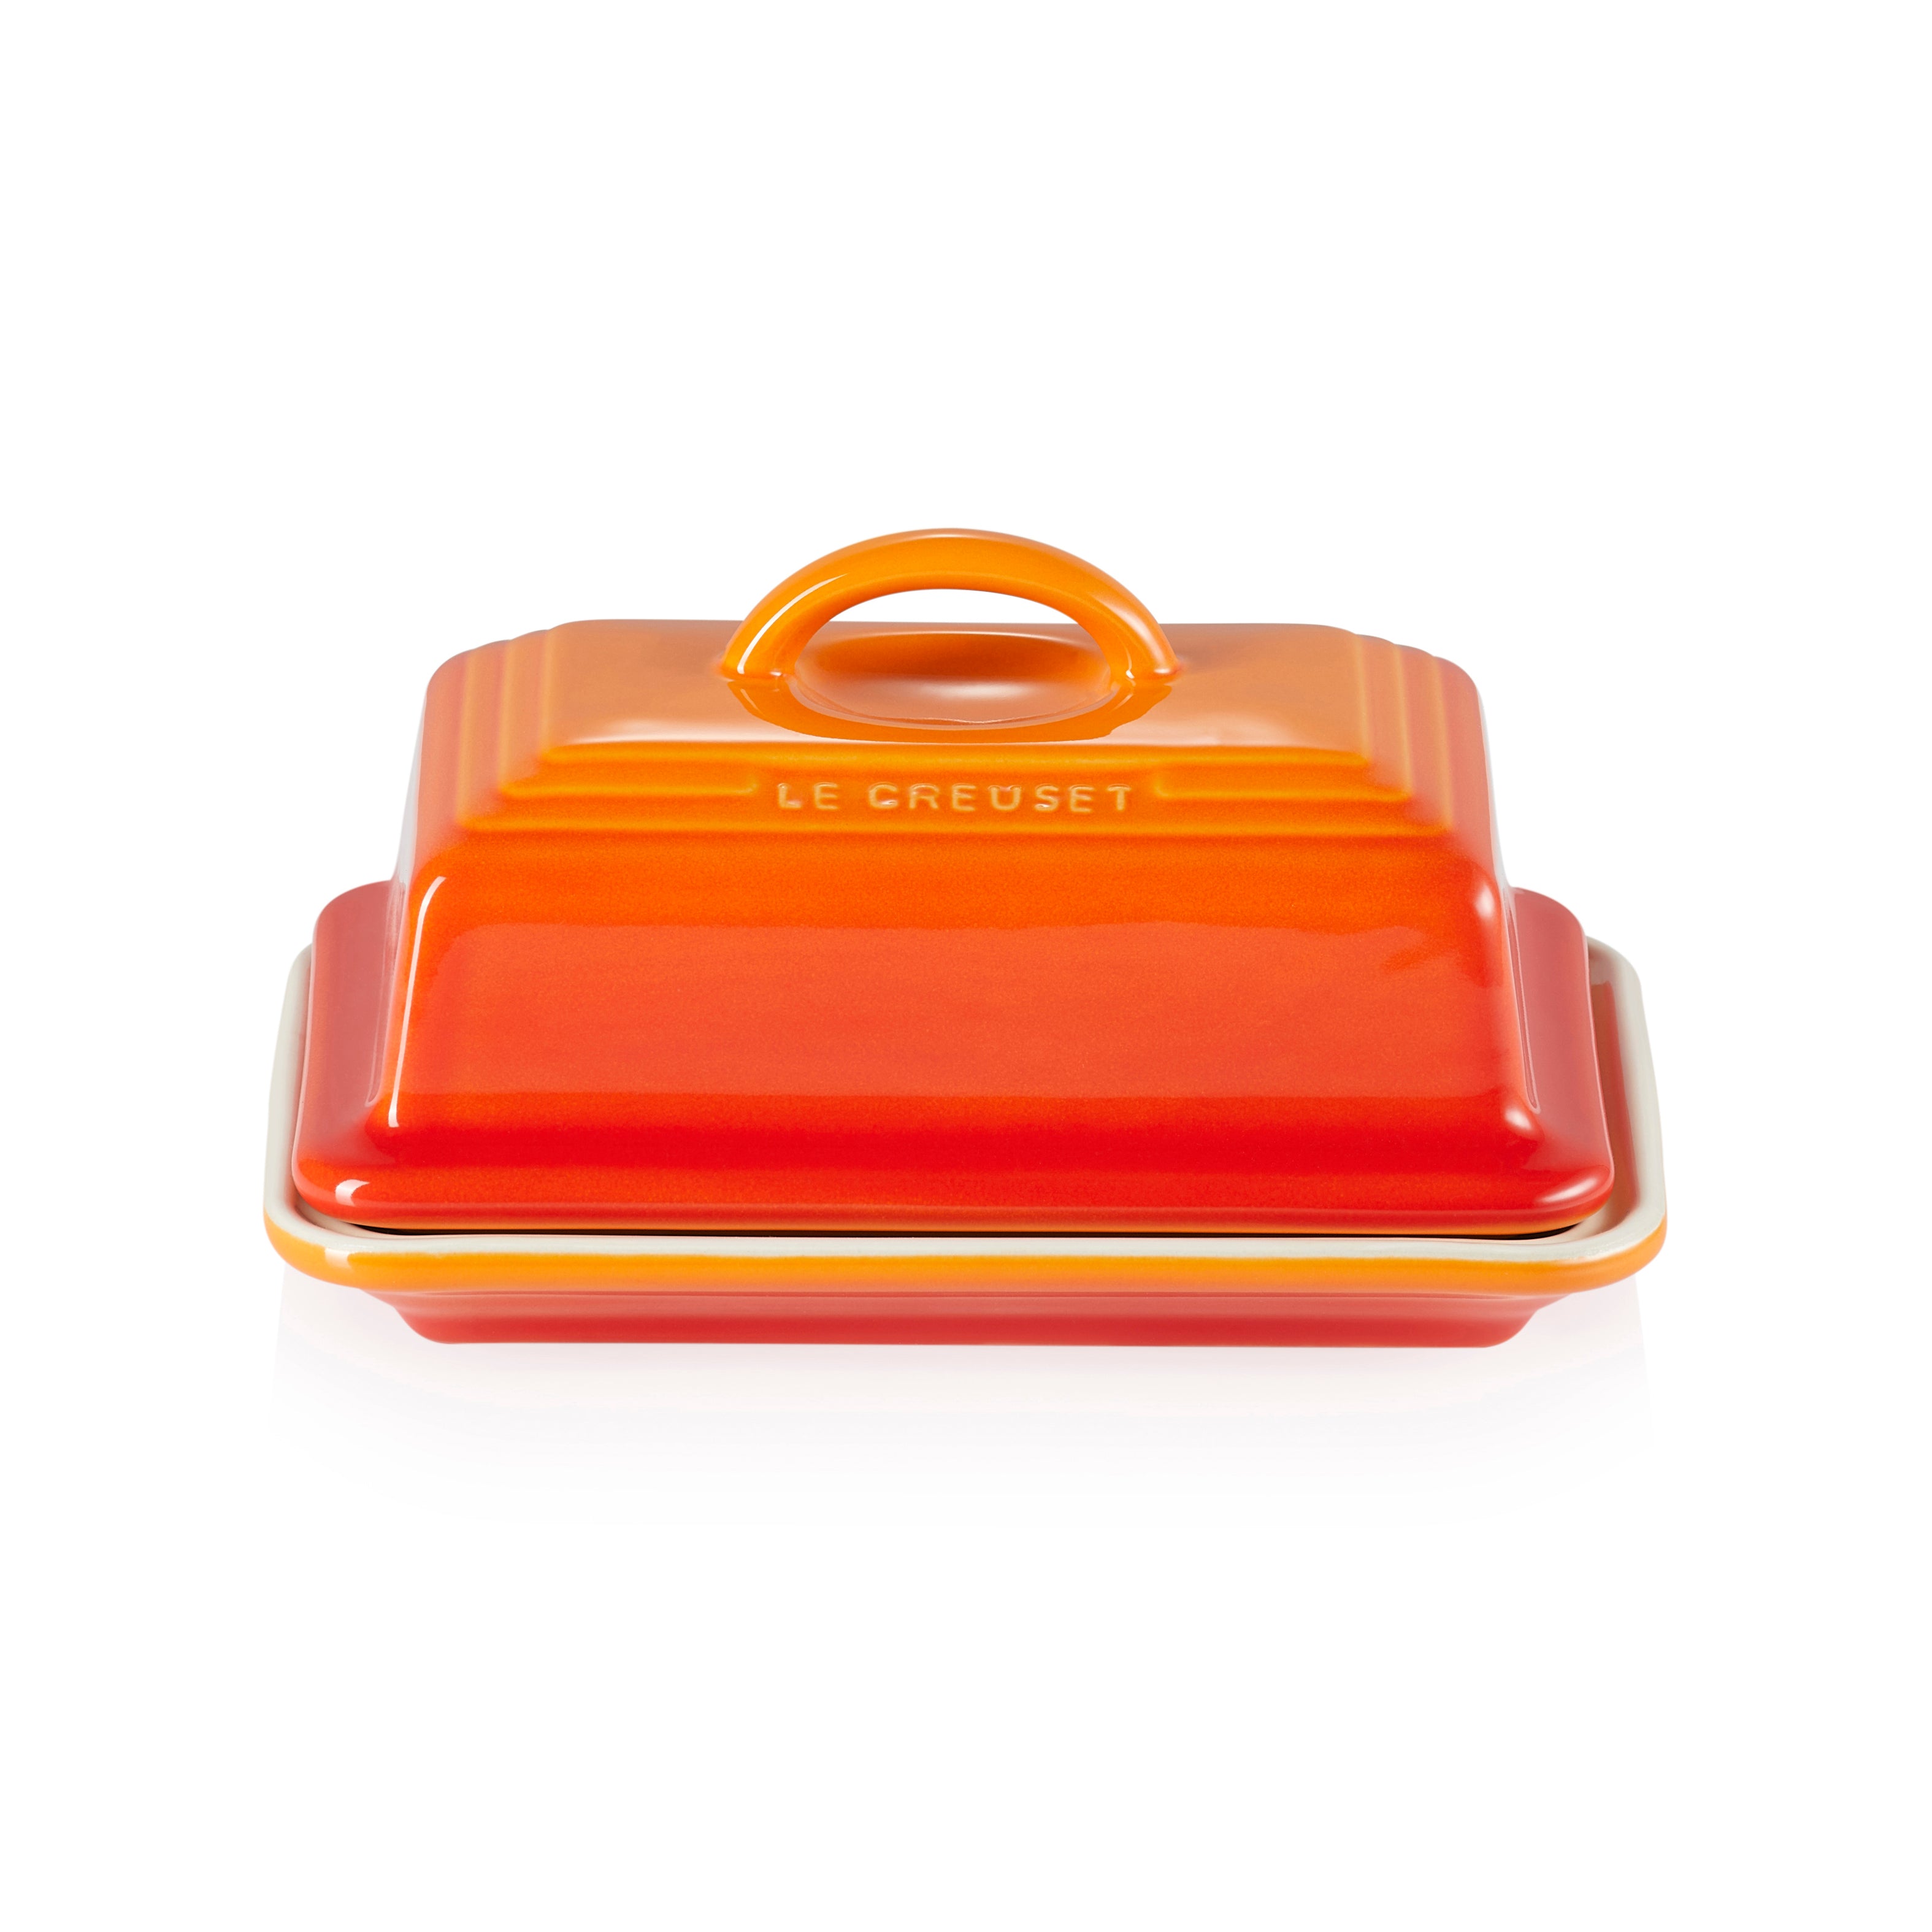 Le Creuset Butter Dish - Volcanic